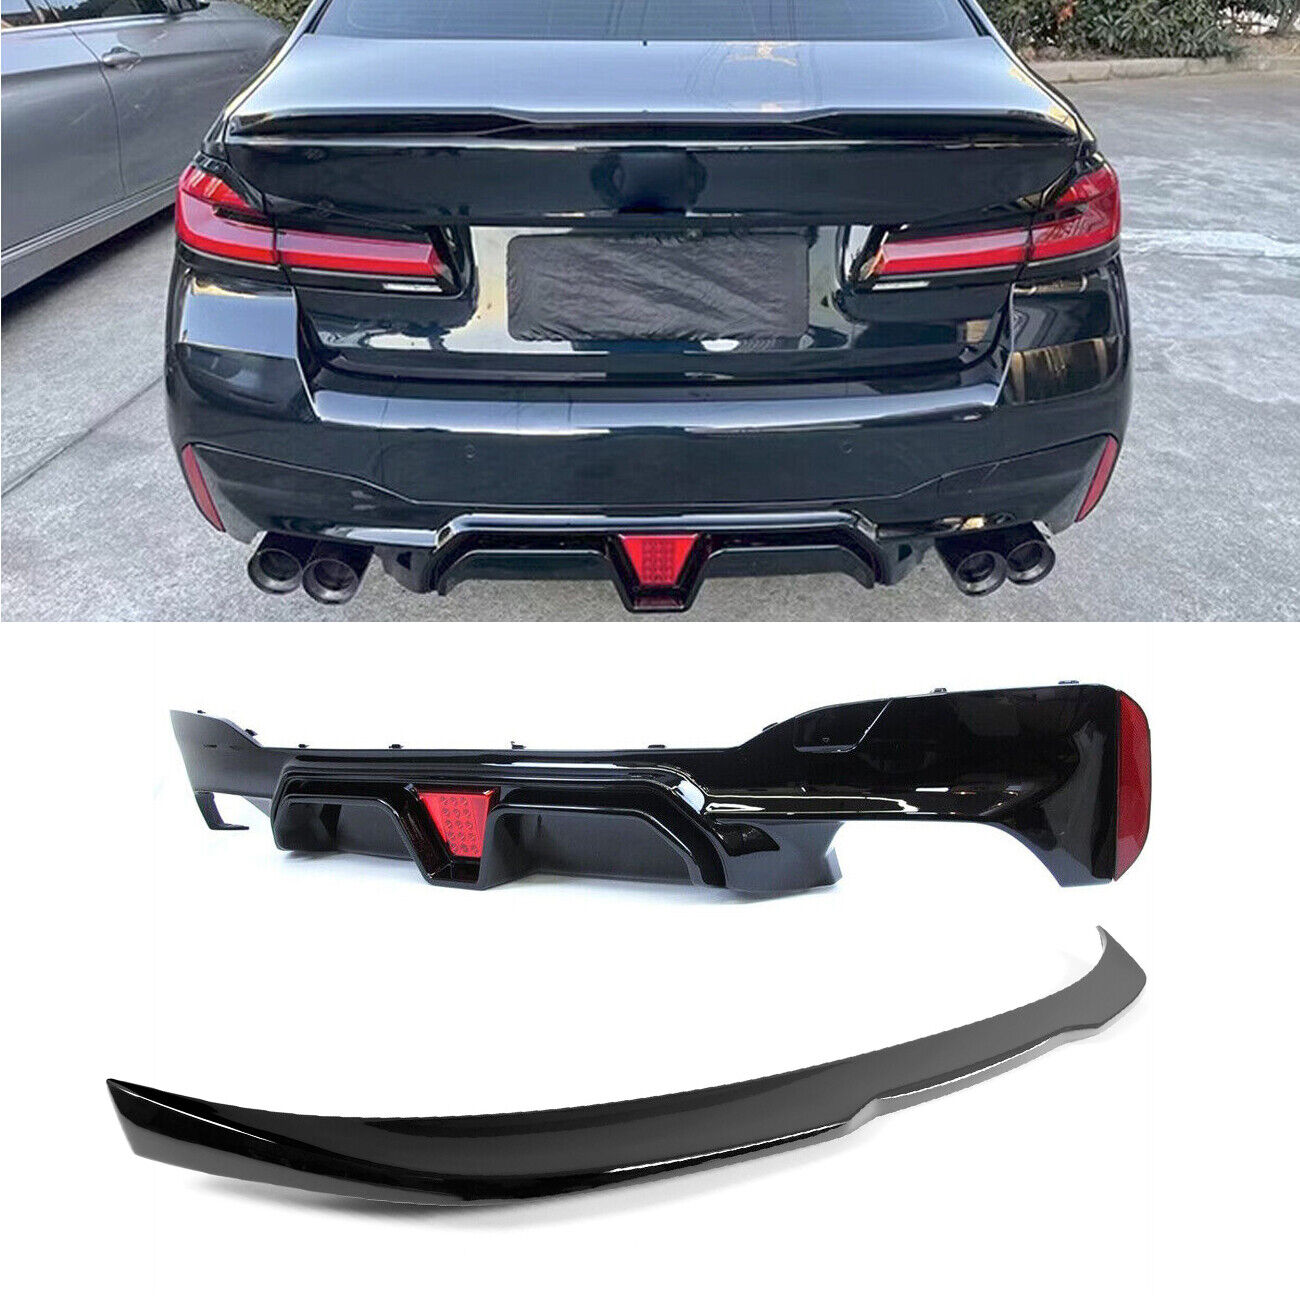 Rear Diffuser+Spoiler M5 Style For 2017-23 BMW G30 5 Series M Sport Gloss Black